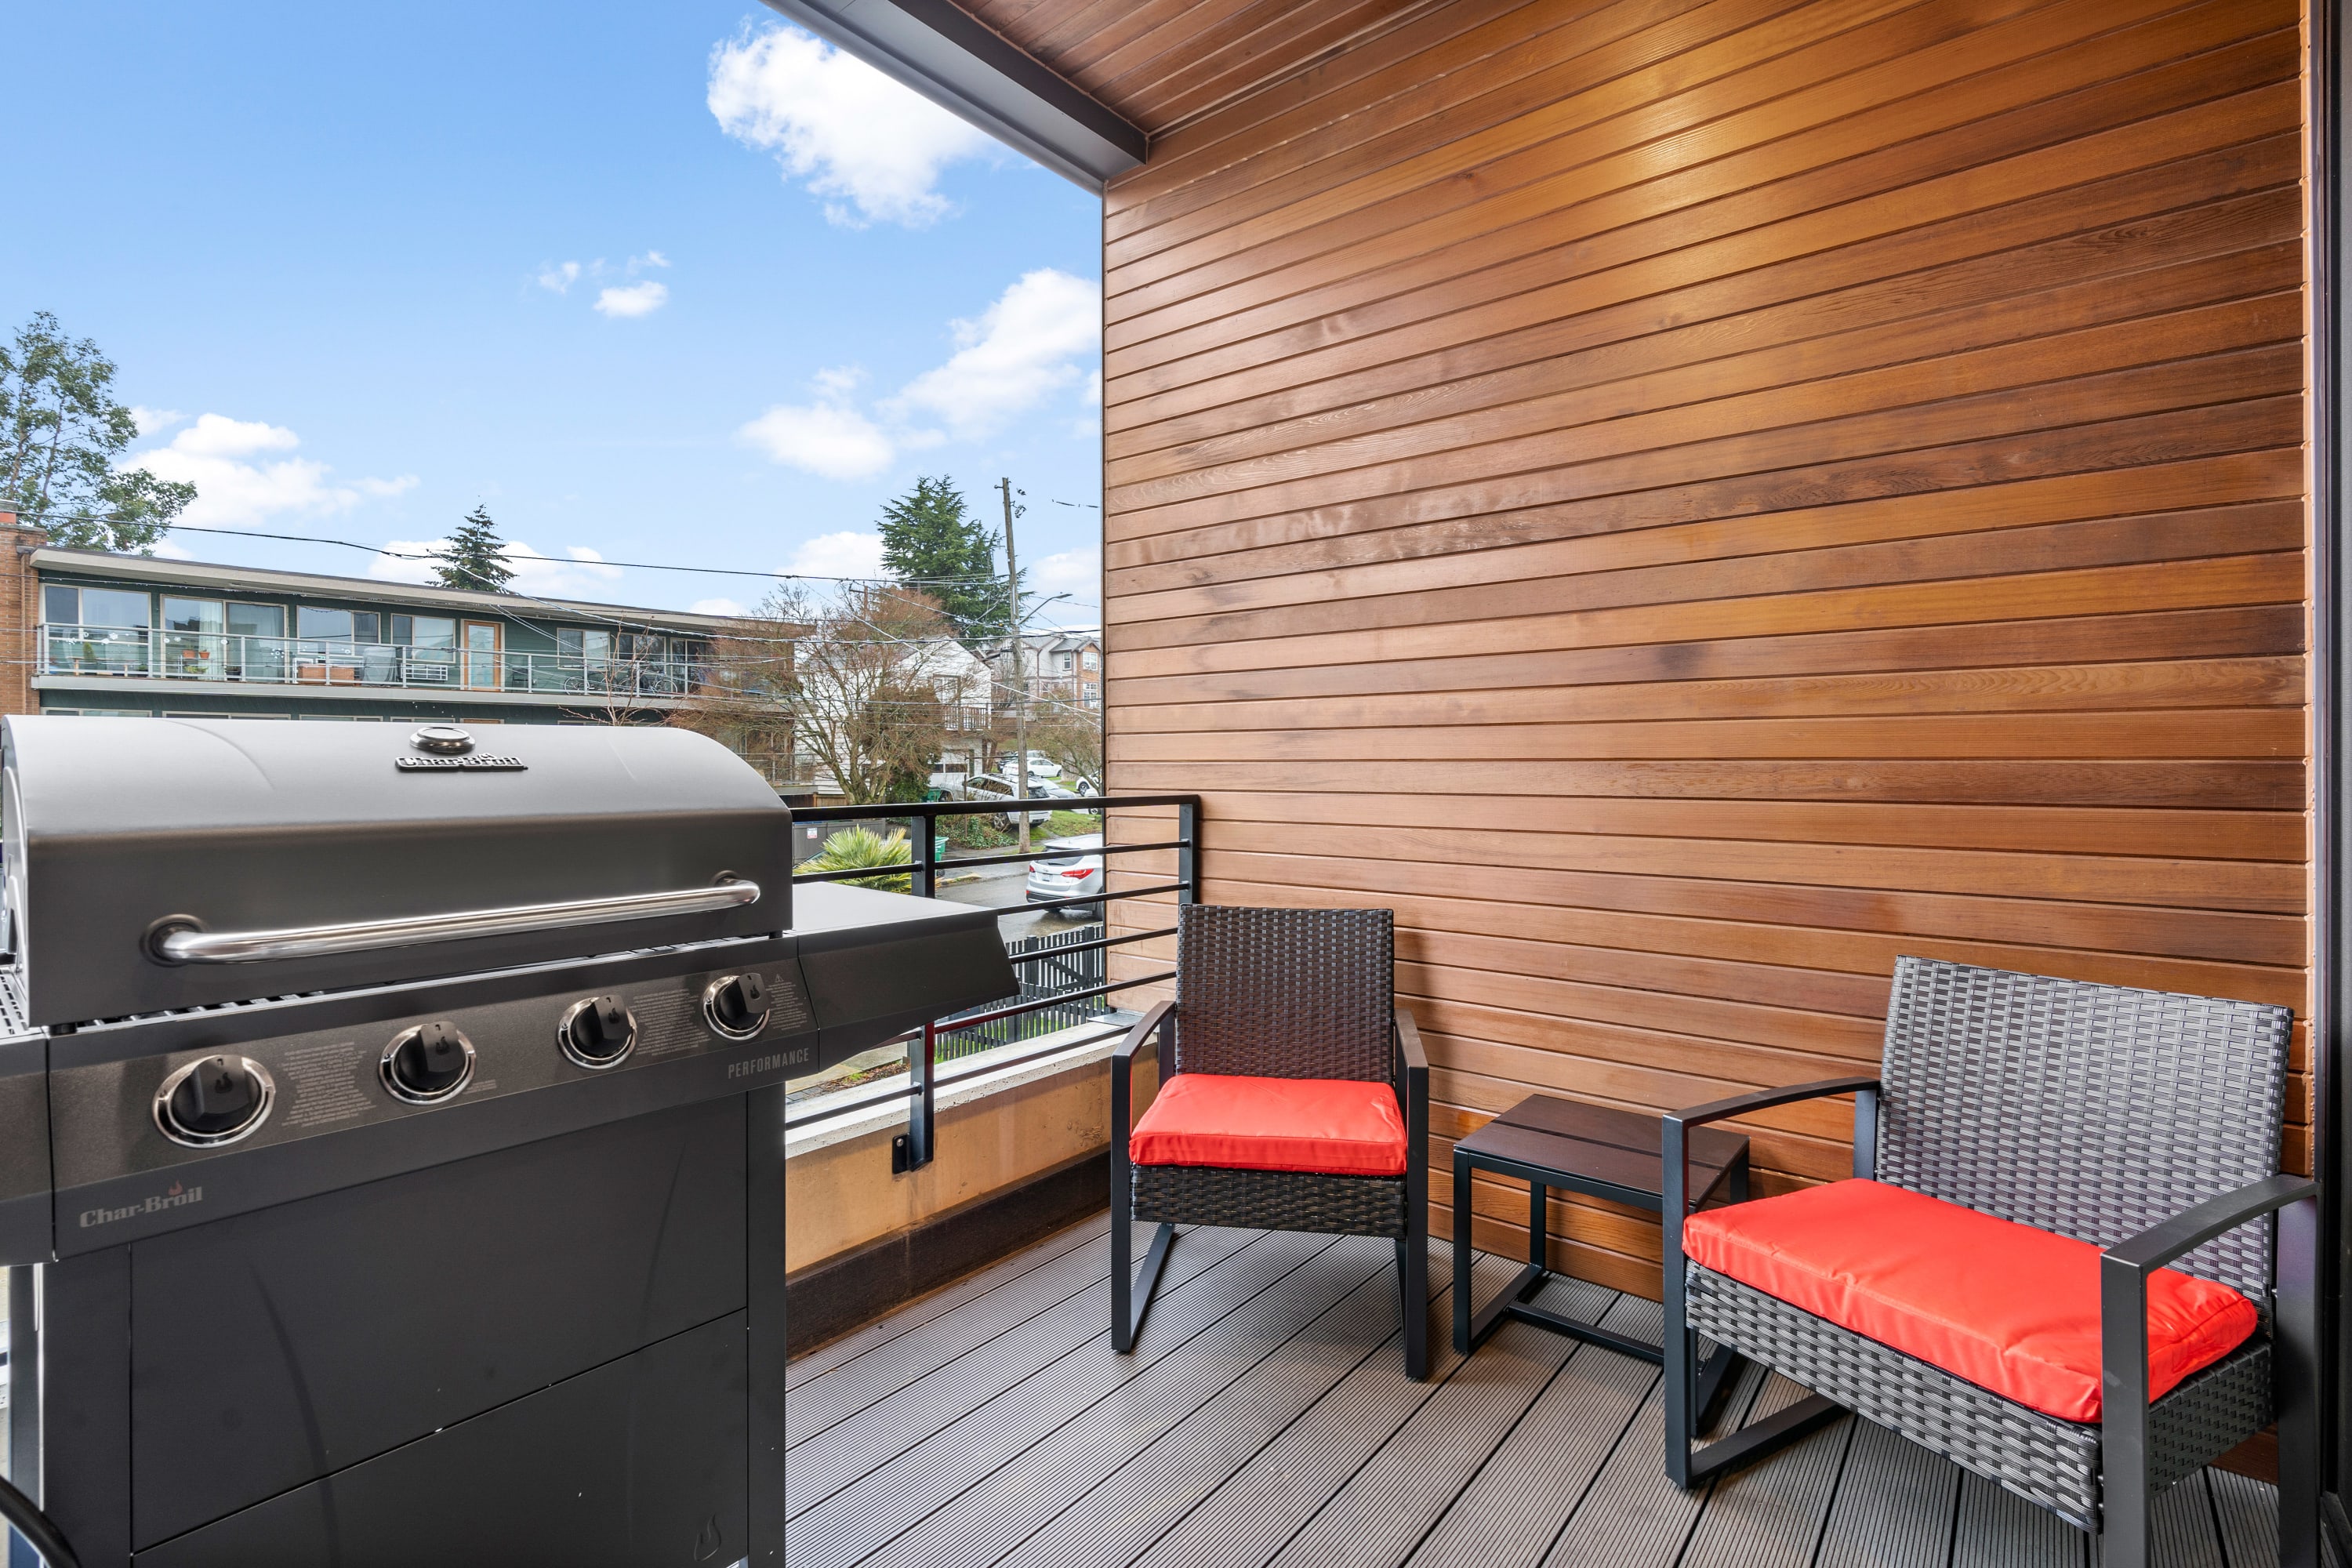 Gas BBQ grill on the secondary porch